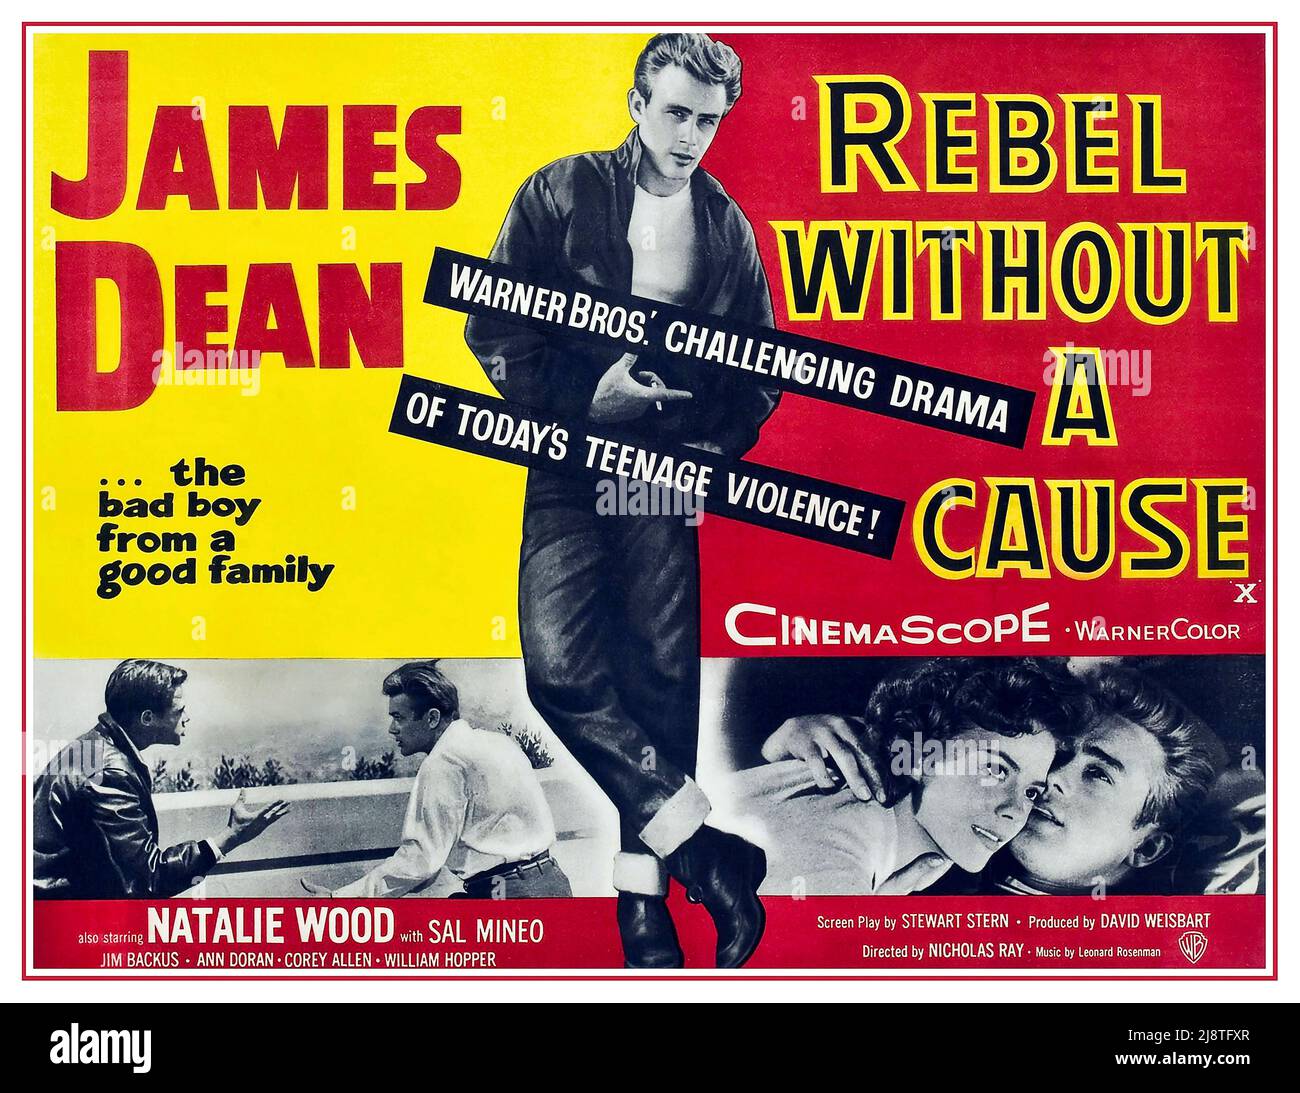 JAMES DEAN 1950's Vintage Movie Film Poster 'Rebel Without a cause' (1955) con James Dean Natalie Wood SAL Mineo... Foto Stock